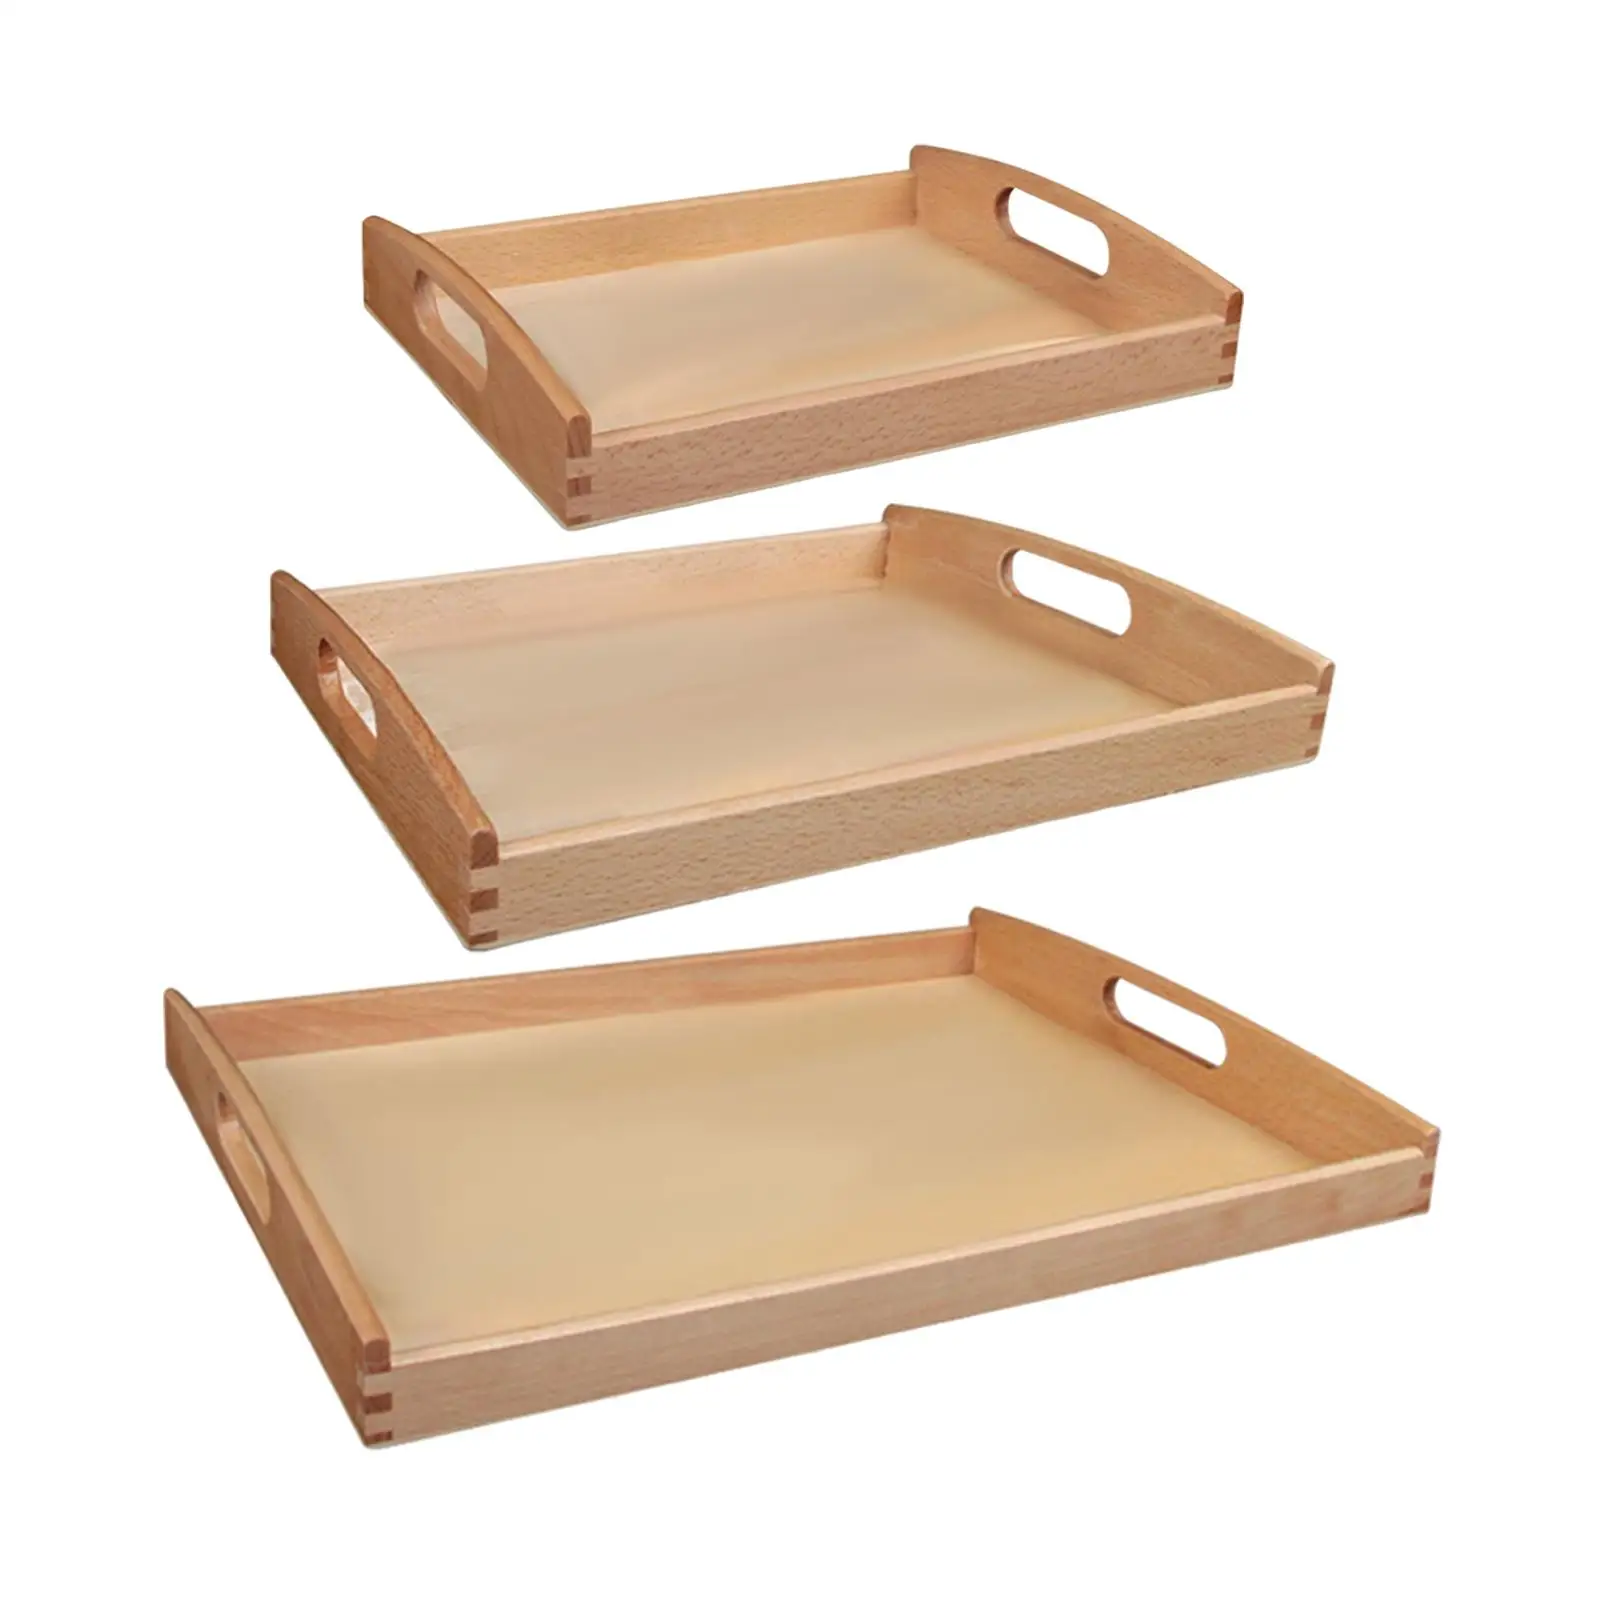 Wooden Serving Trays Teaching Aids Education for Party Crafts Serving